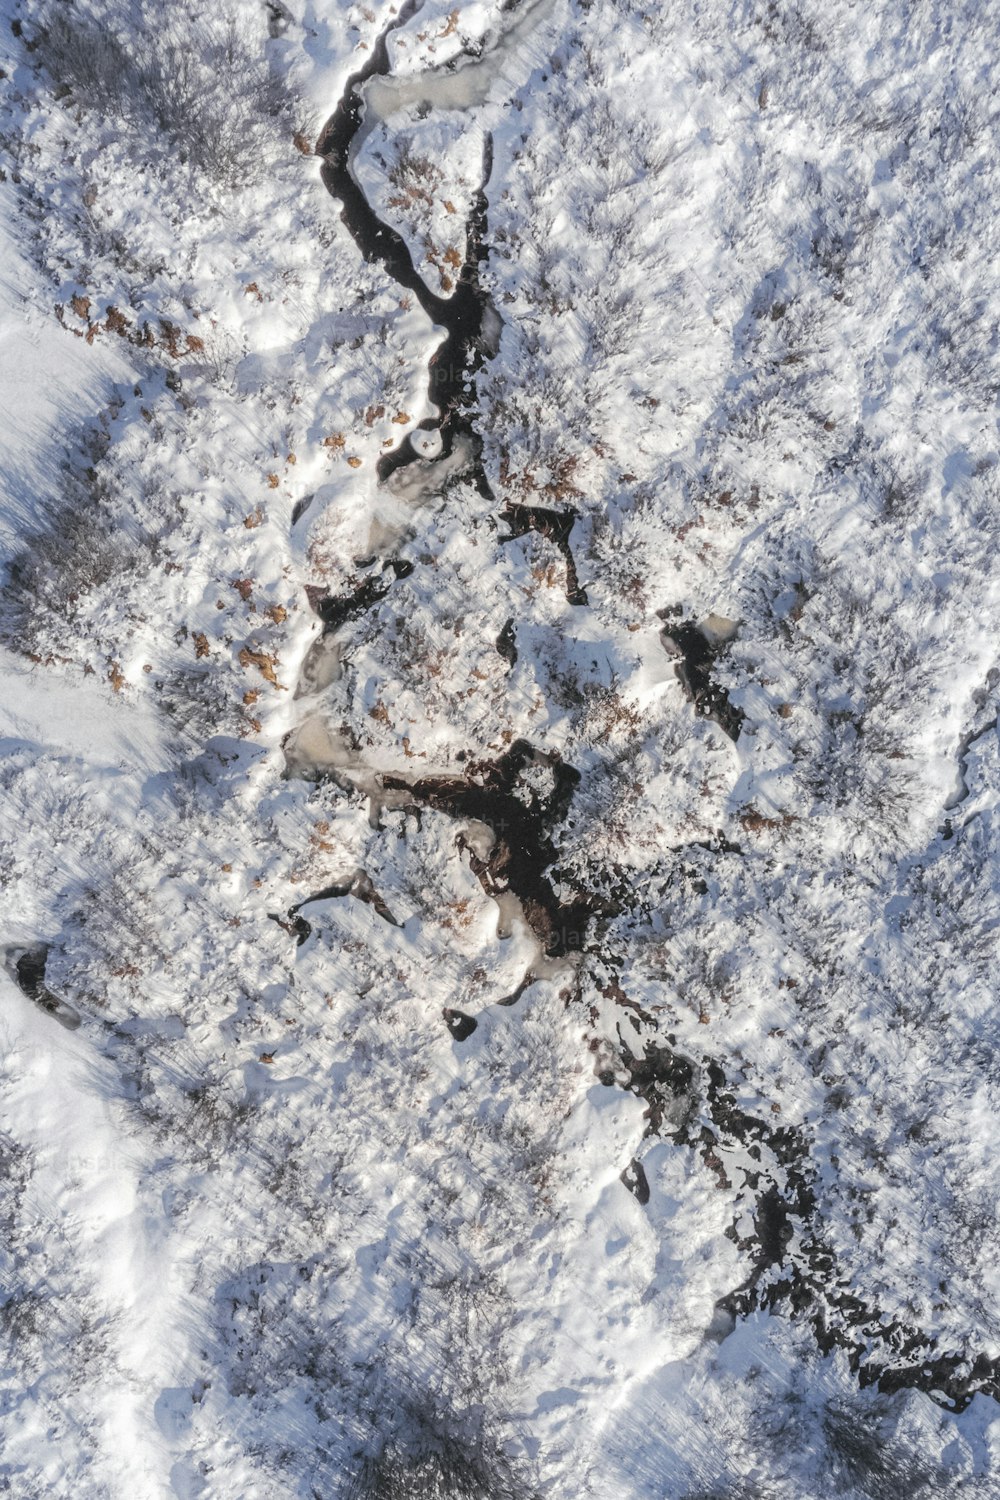 a bird's eye view of snow covered ground